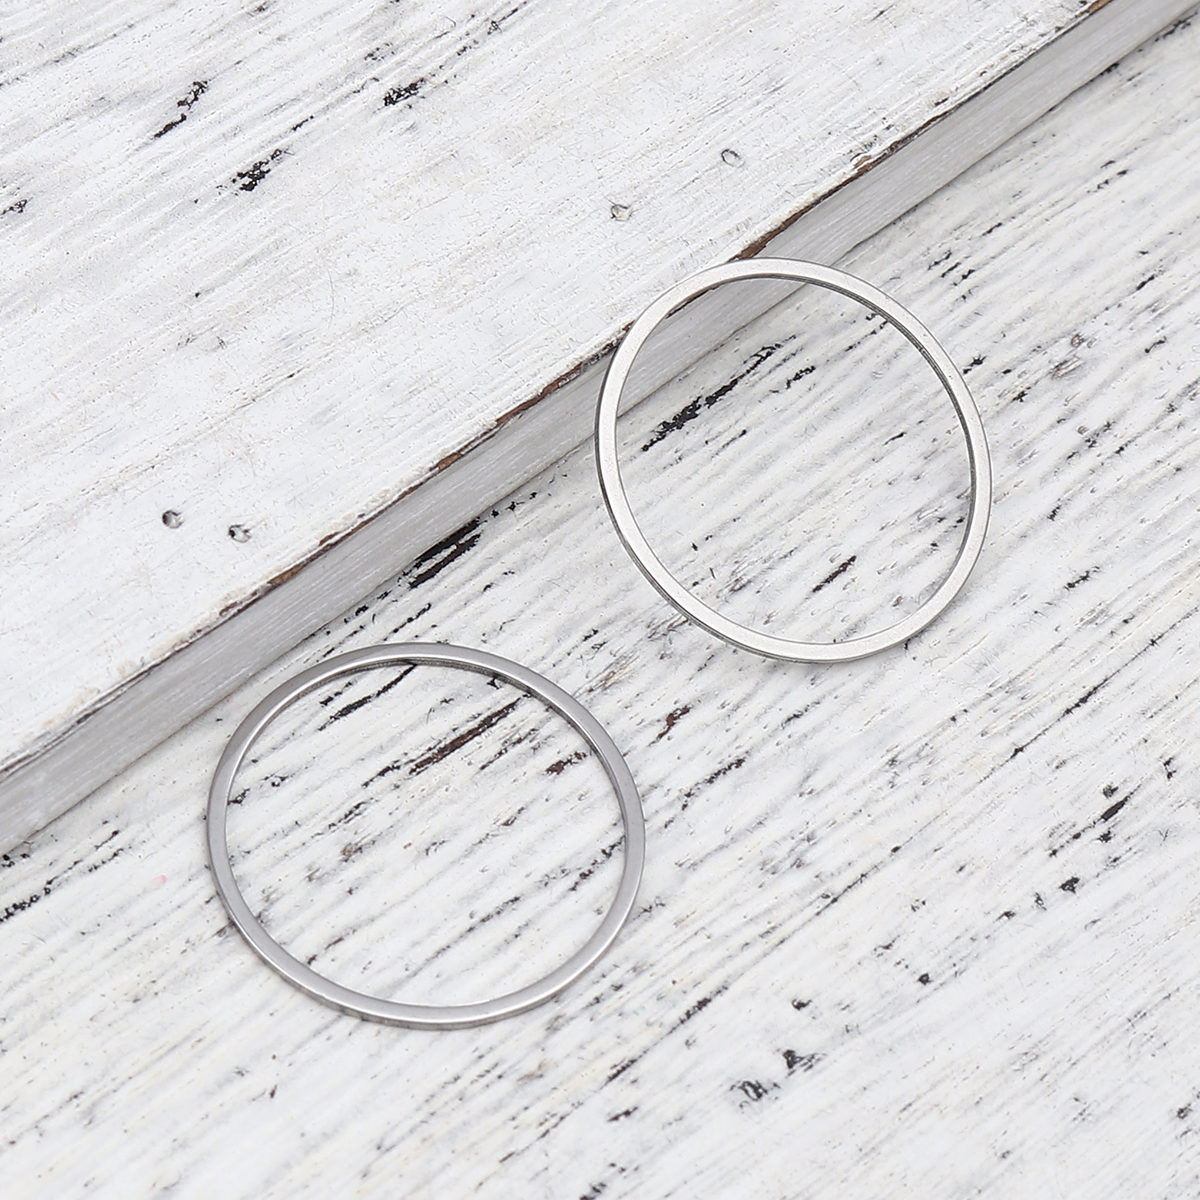 Picture of 0.8mm Stainless Steel Closed Soldered Jump Rings Findings Circle Ring Silver Tone 25mm Dia., 10 PCs